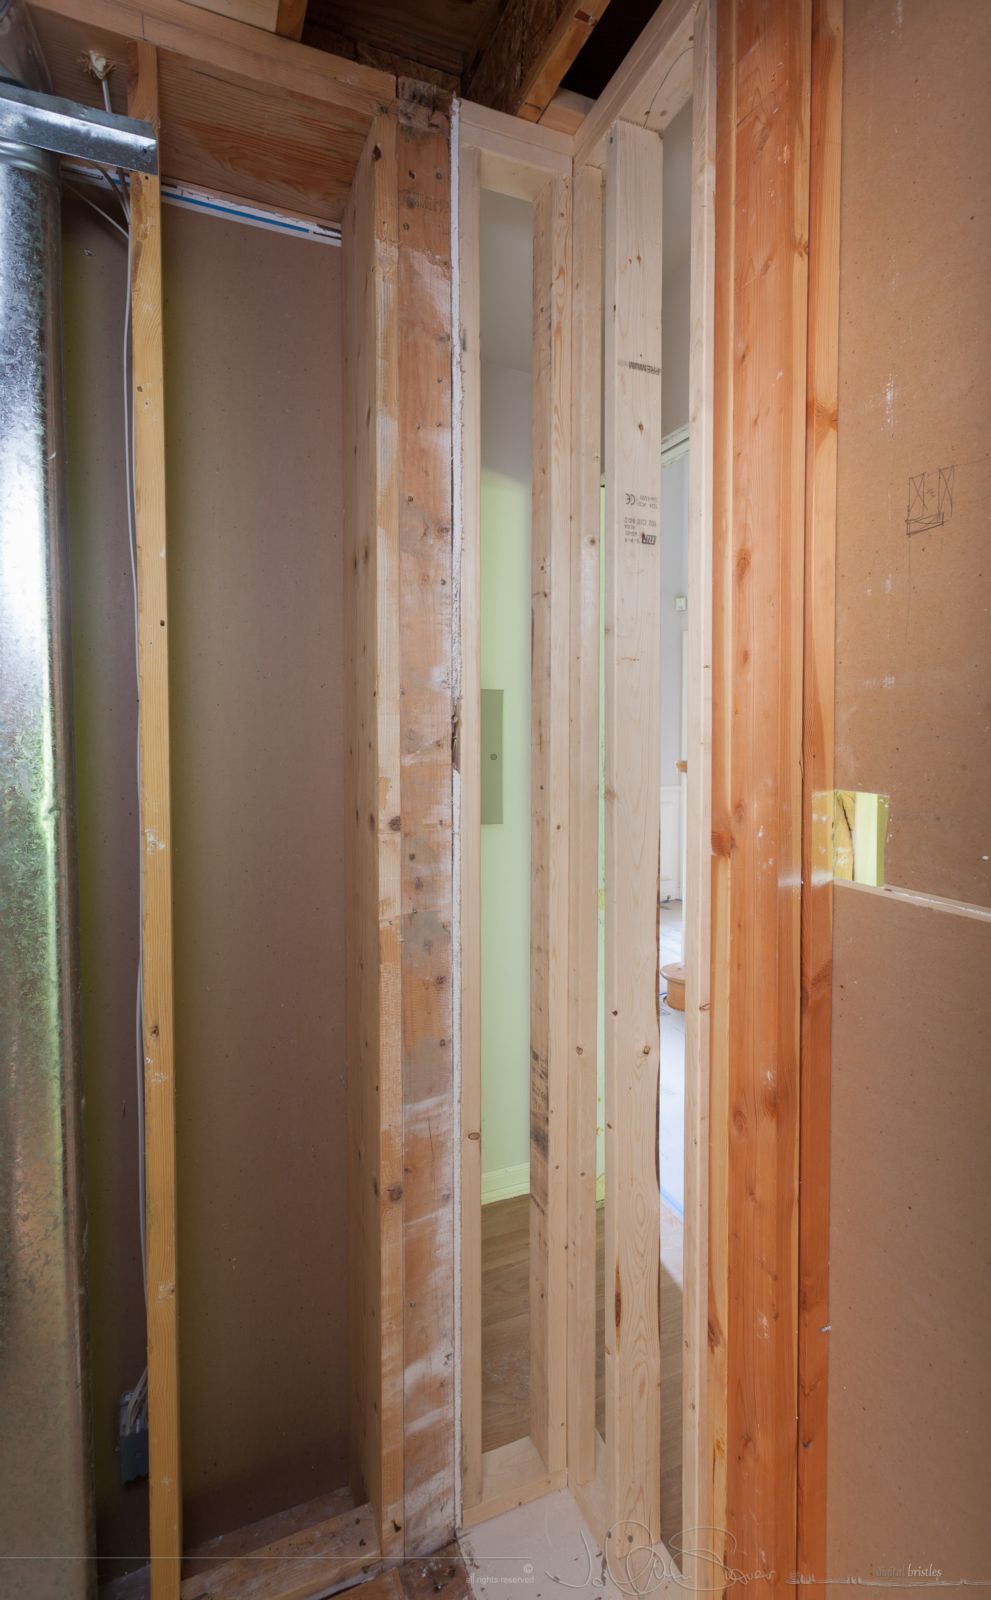 Pantry wall framing - for a rectangle. May 19th